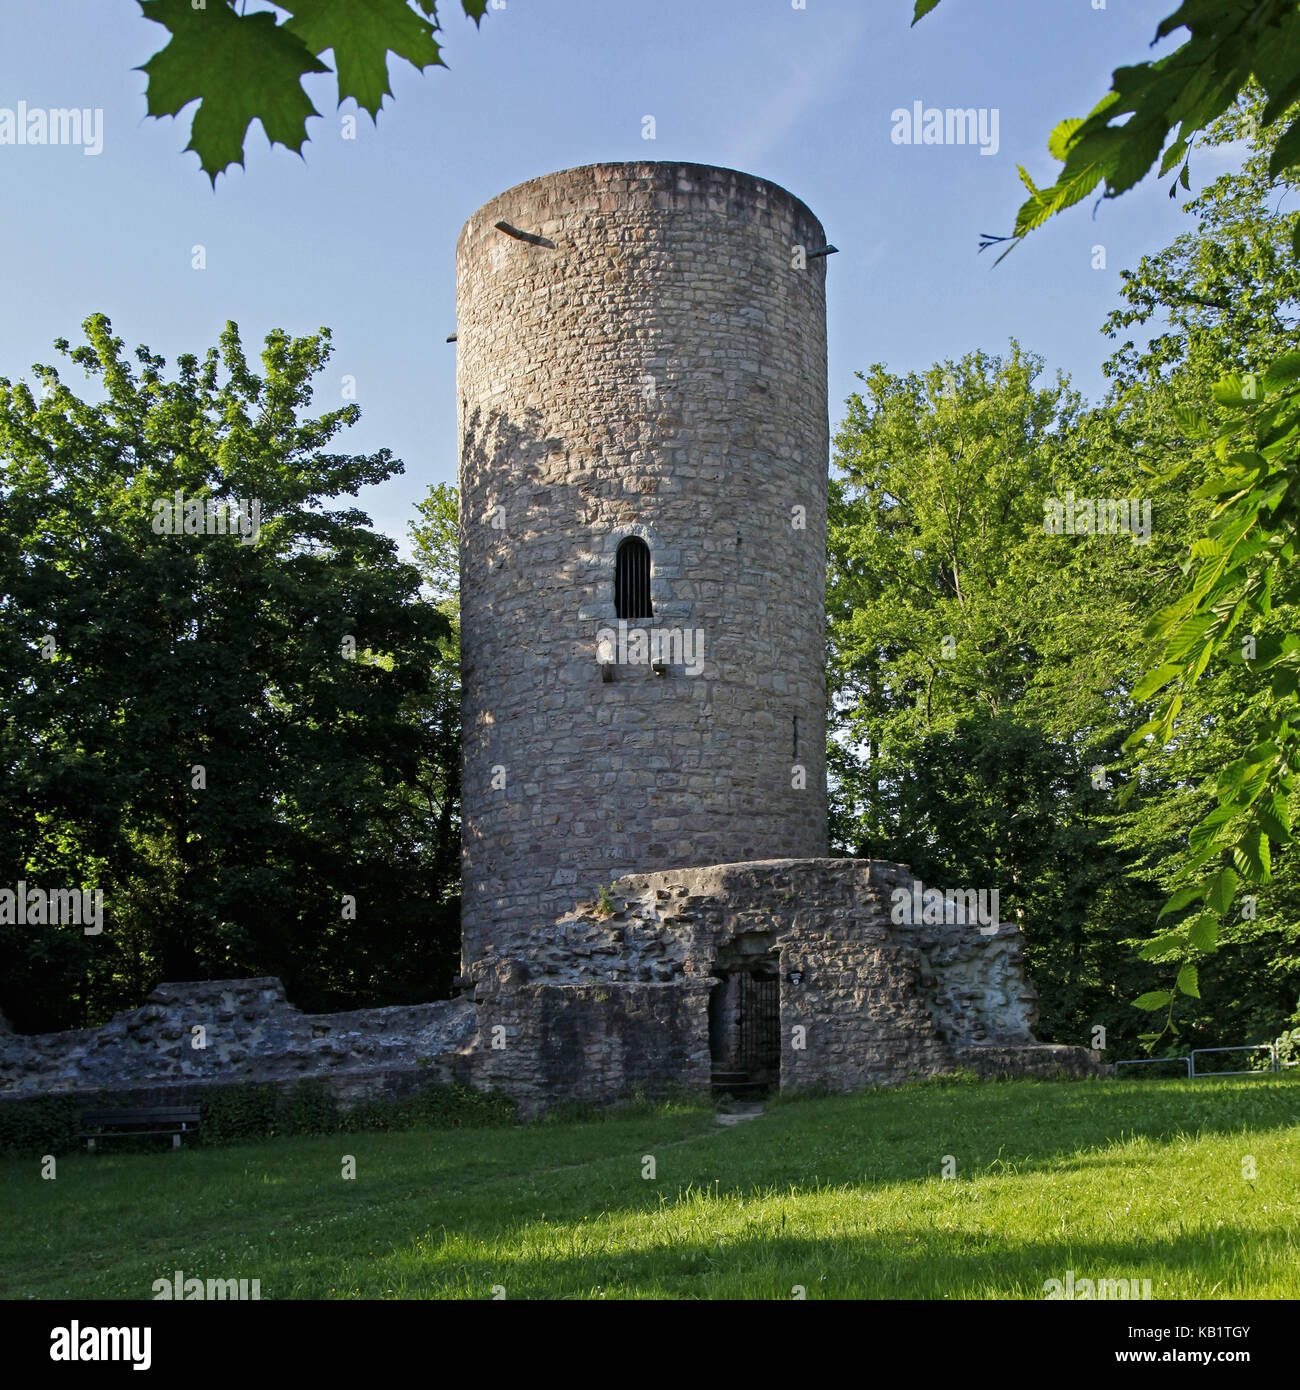 Germany, Hessia, Bad Soden-Salmünster, castle ruin proud mountain, in 1252, seat of the Hutten till 1535, afterwards no more inhabited, Stock Photo